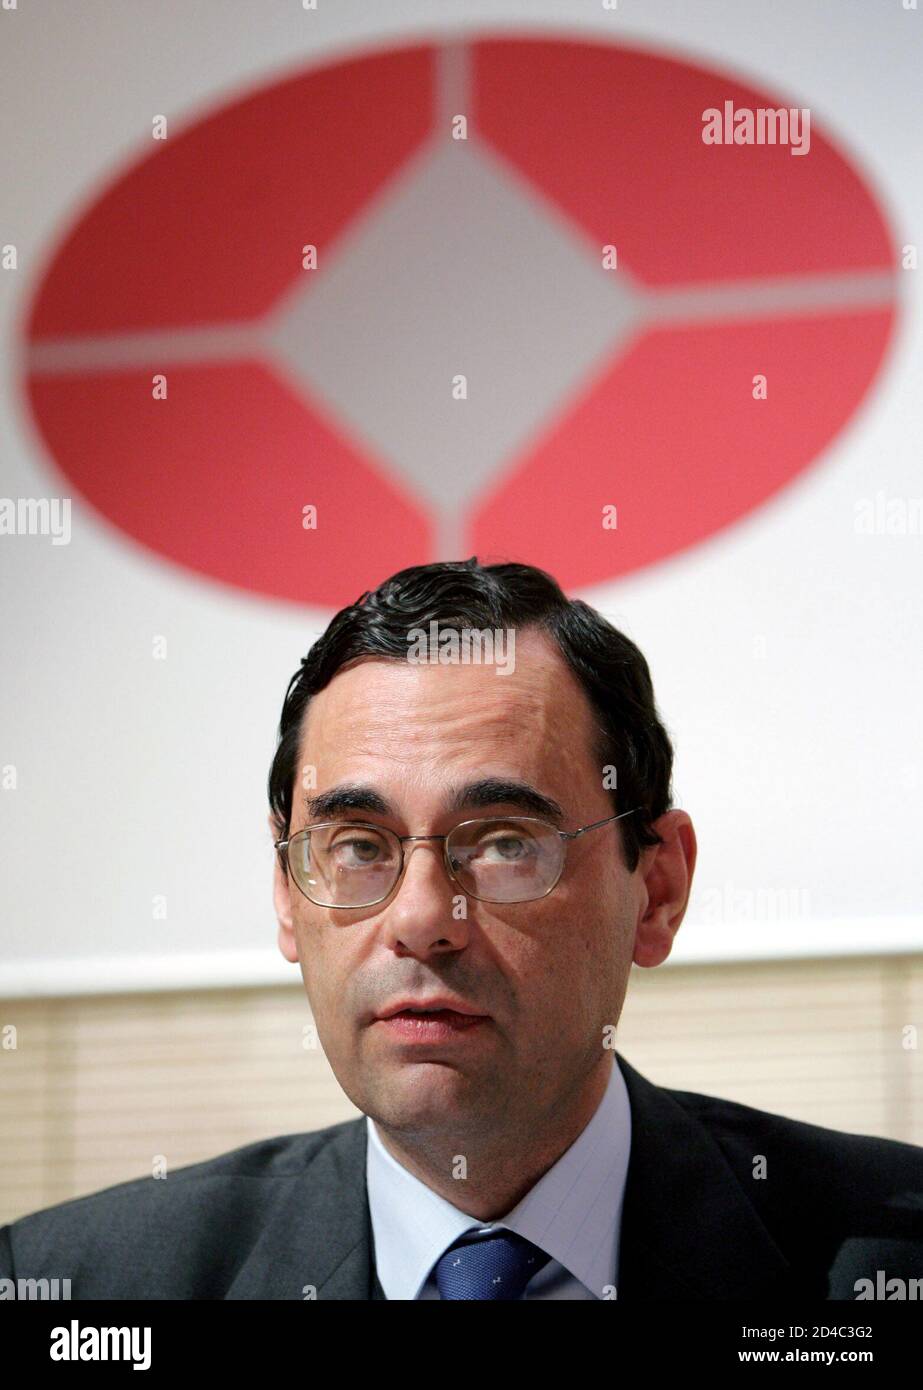 Jaime Caruana, Governor of the Bank of Spain and Chairman of the Basel Committee on Banking Supervision attends a news conference at the Bank For International Settlements (BIS) in Basel, June 26, 2004. [Central bank governors and the heads of bank supervisory authorities in the Group of Ten (G10) industrialised nations approved a sweeping rewrite of global safety rules known as Basel II.] Stock Photo